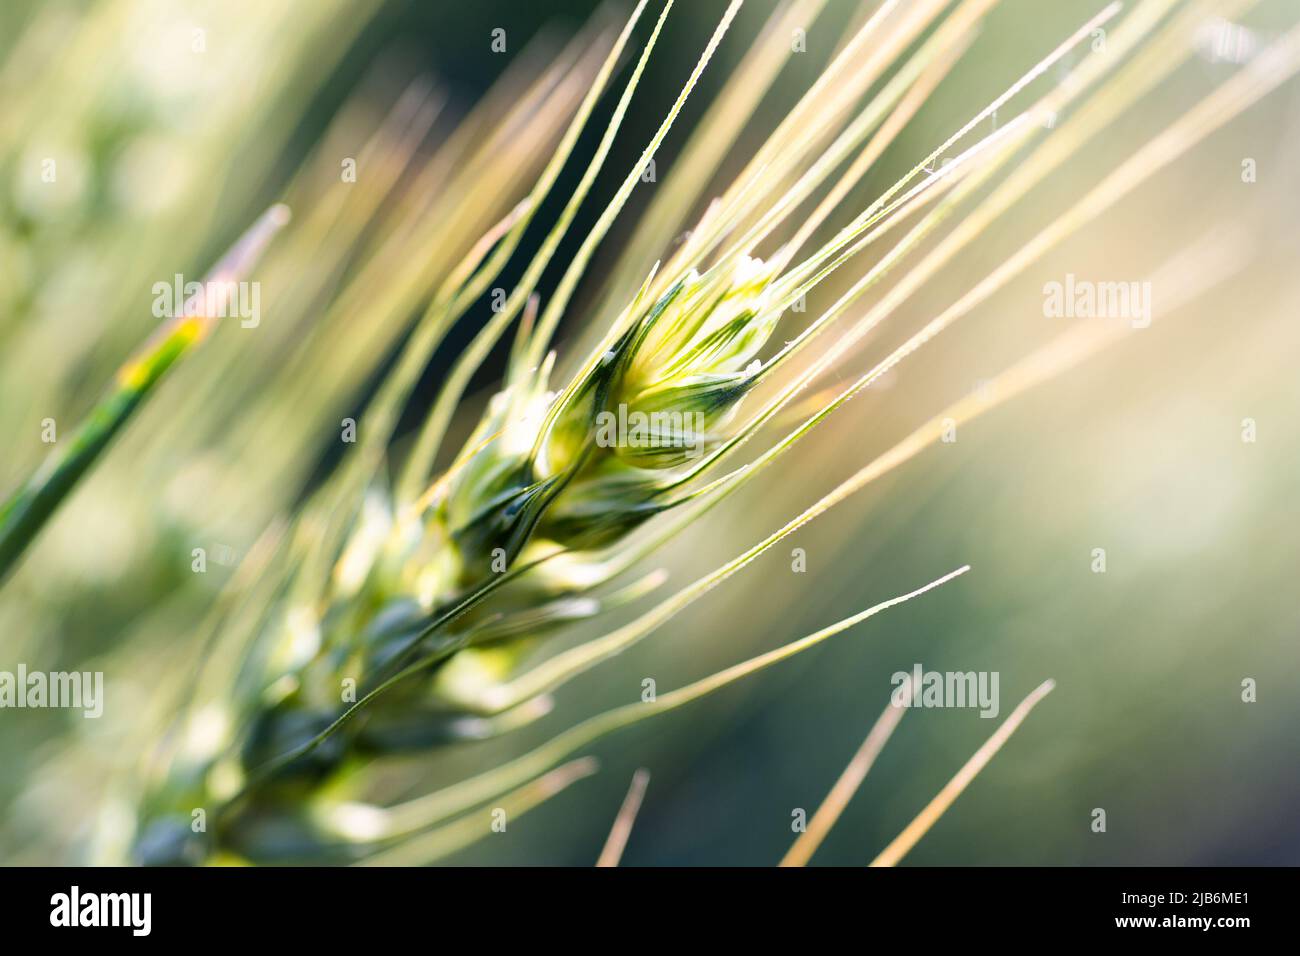 Young wheat field in spring, seedlings growing in a soil. Stock Photo